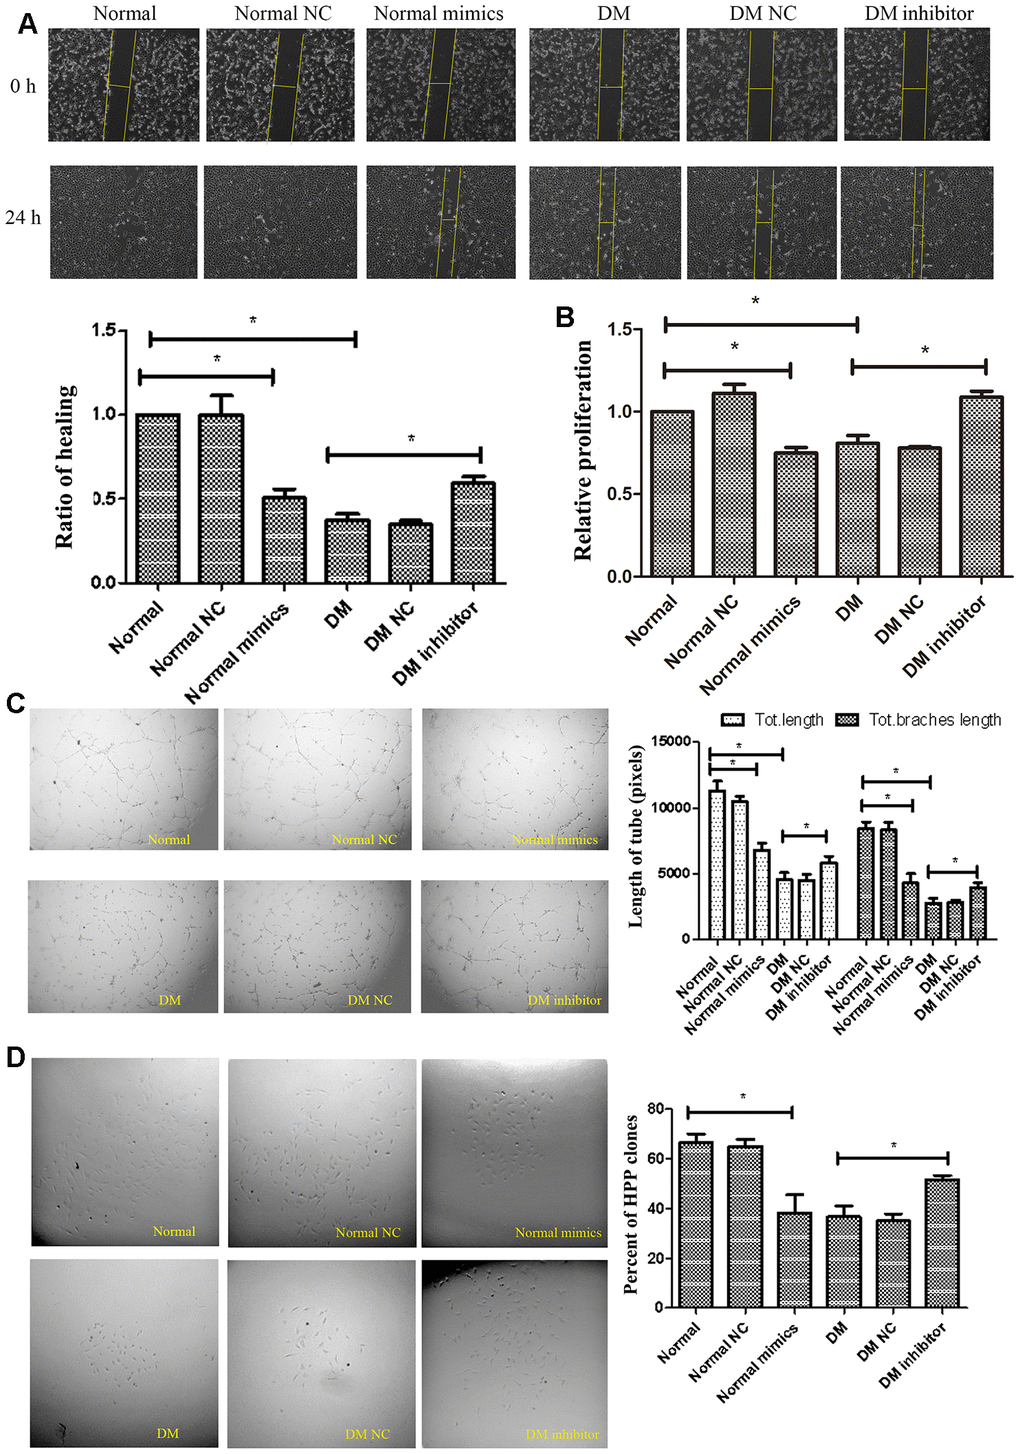 MiR-139-5p inhibits the function of ECFCs. (A, B) Migration and proliferation of normal ECFCs transfected with miR-139-5p mimics and DM ECFCs transfected with miR-139-5p inhibitors were assessed. The photos were captured by a 40X microscope and the statistics performed by Image J. (N=3) *P C) Tube formation of normal ECFCs transfected with miR-139-5p mimics and DM ECFCs transfected with miR-139-5p inhibitors were assessed. The photos were captured by a 40X microscope and the statistics performed by Image J. (N=3) *P D) The cloning ability of normal ECFCs transfected with miR-139-5p mimics and diabetic ECFCs transfected with miR-139-5p inhibitors were detected using single cell clone experiments. (N=3) *P 